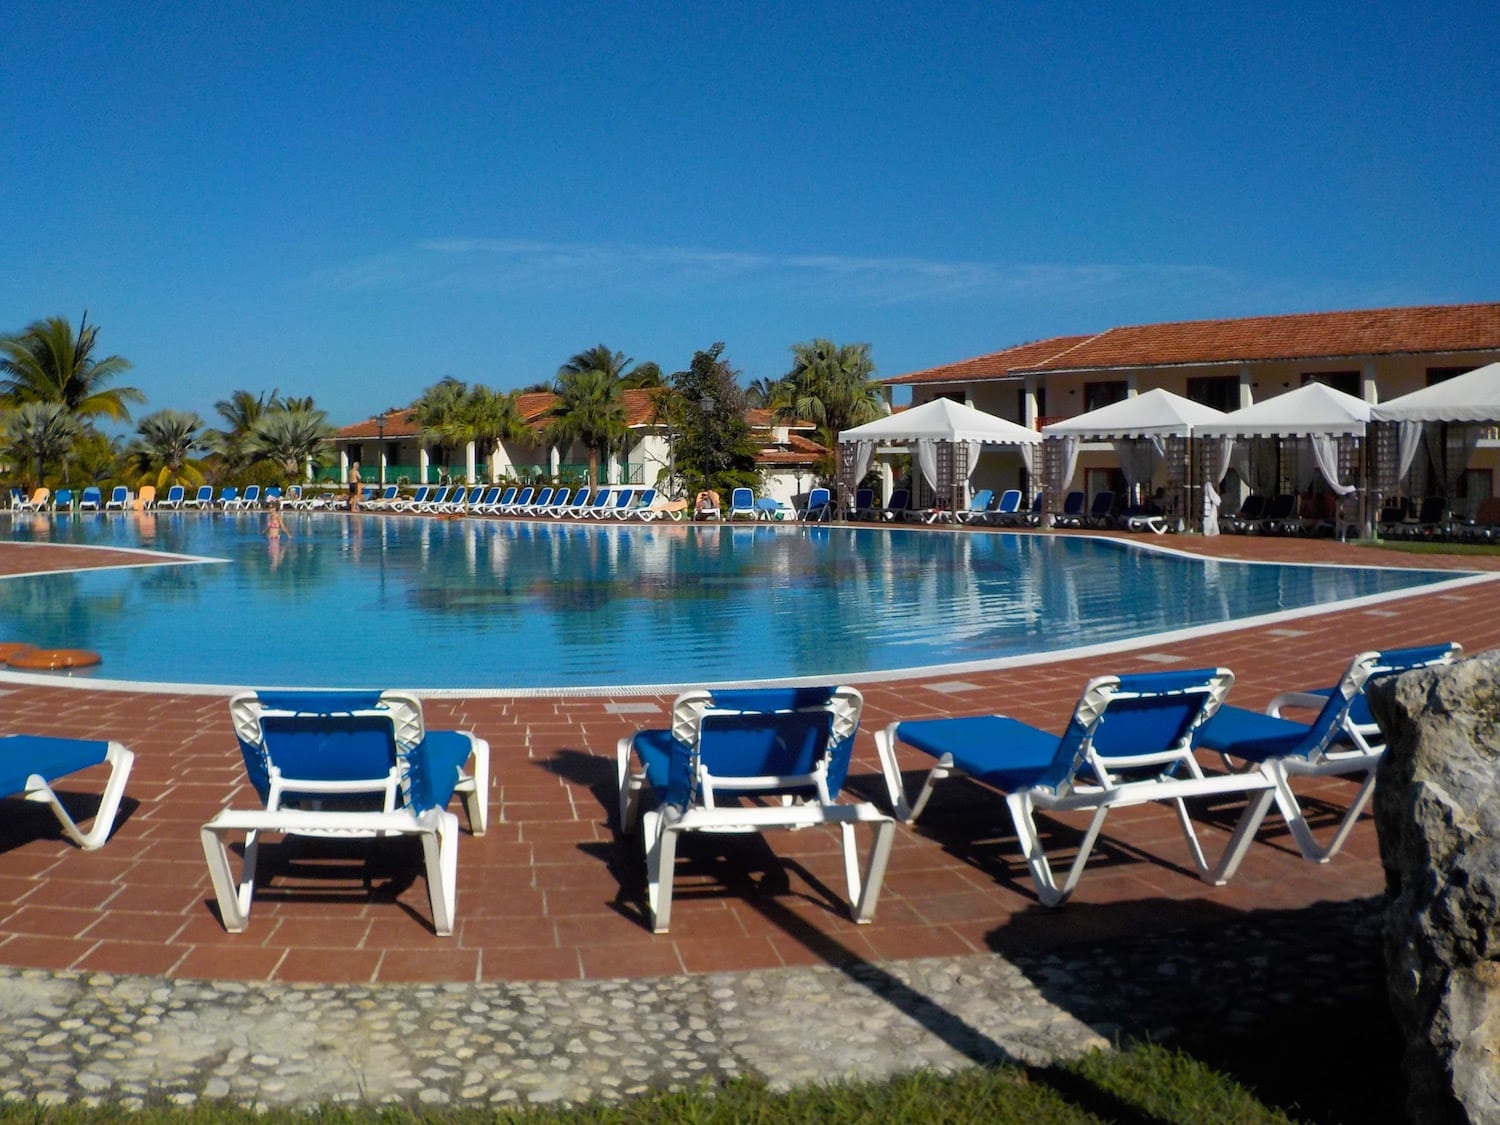 The pool surrounded by loungers at our all-inclusive vacation resort in Cuba